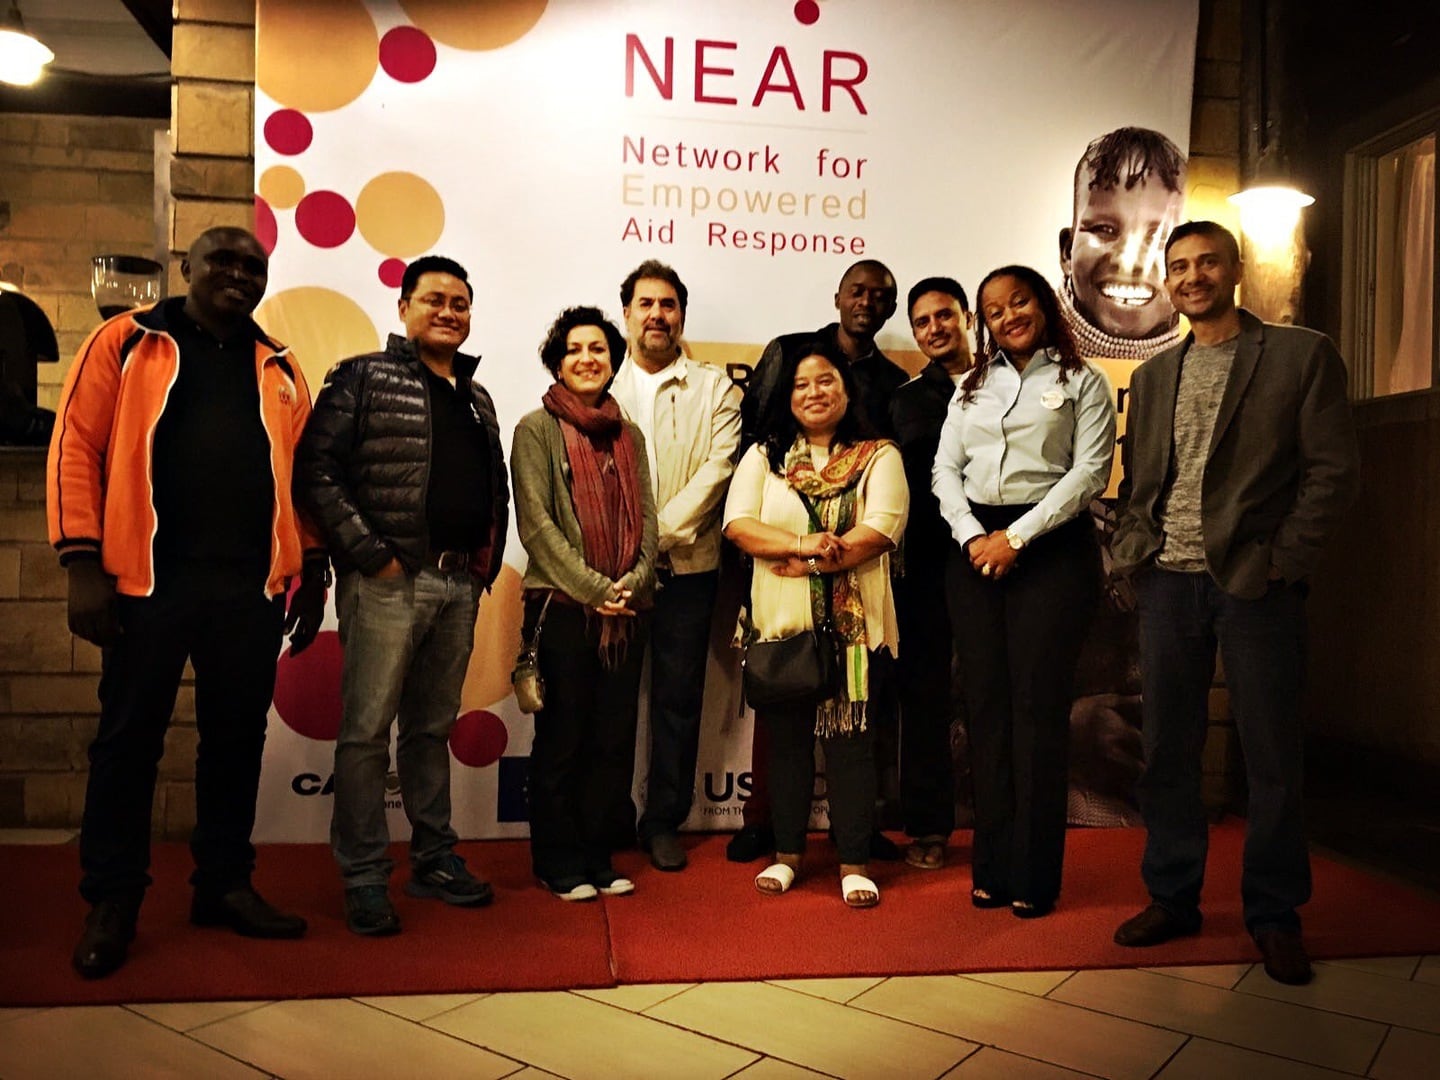 NEAR Network – Representing Local and National NGOs to Promote the Localization of Development - Leaders